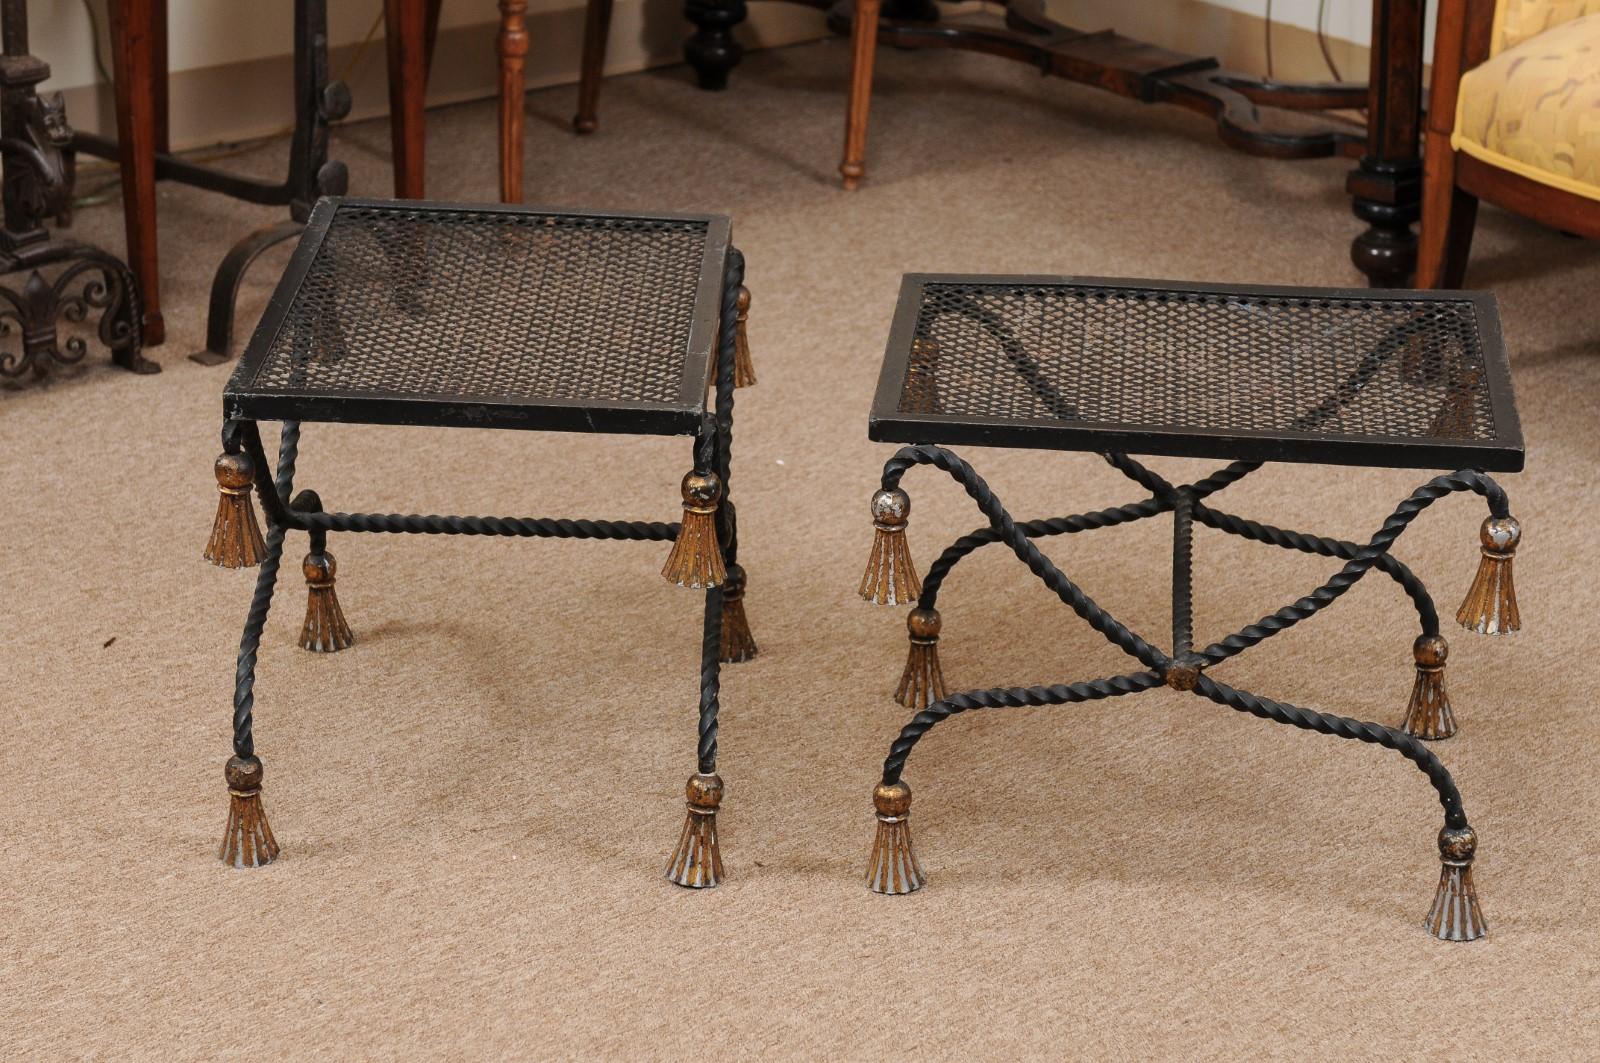 Pair of Vintage Black Painted & Gilt Iron Benches with Tassels, 20th Century For Sale 4